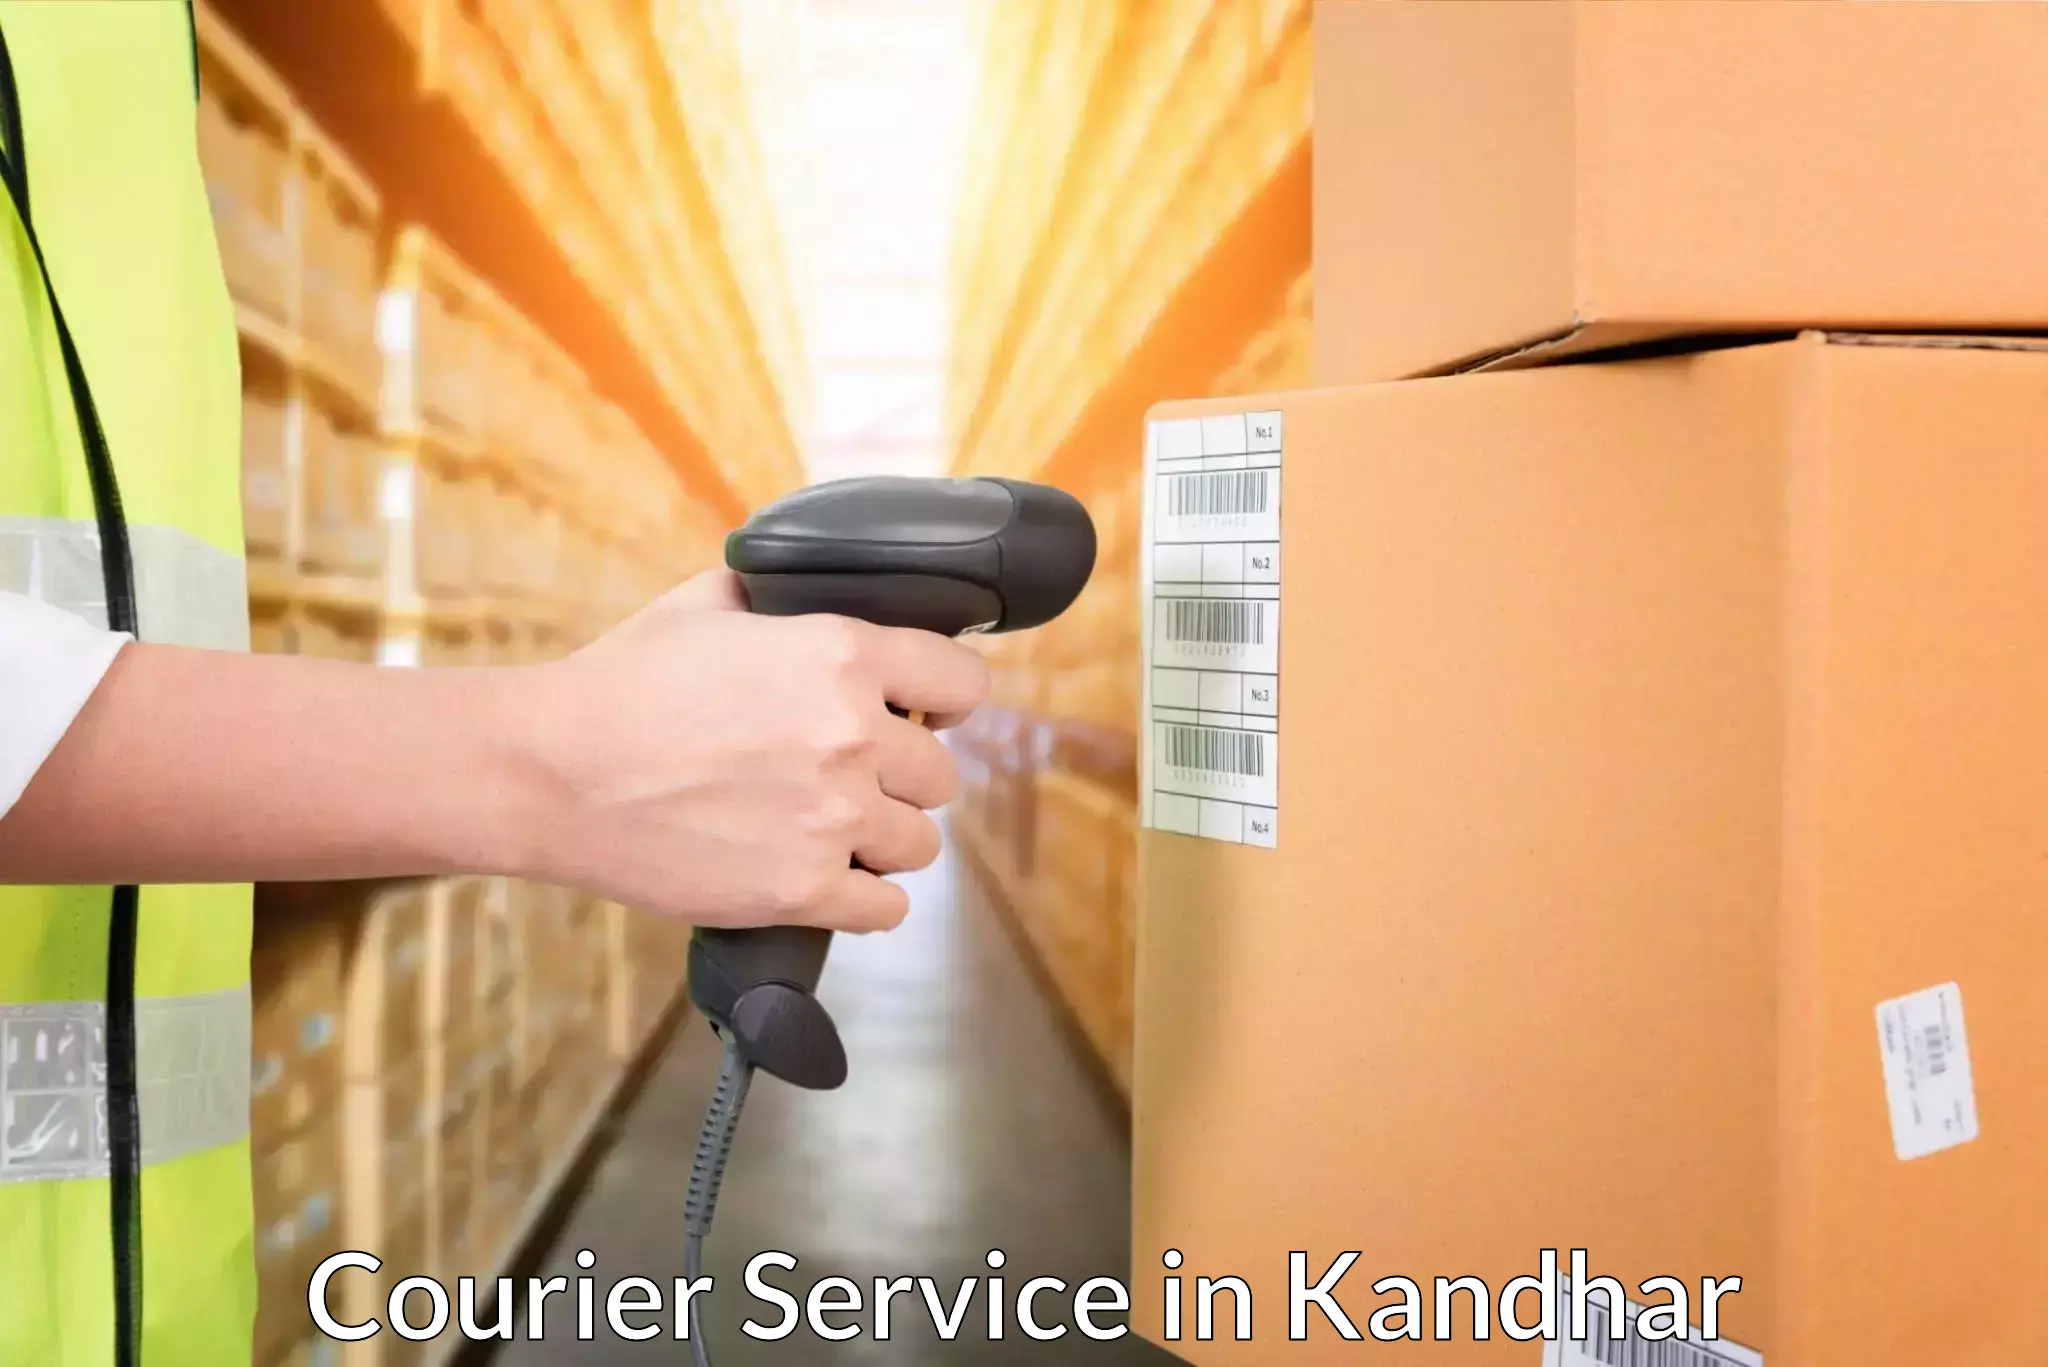 Express delivery network in Kandhar